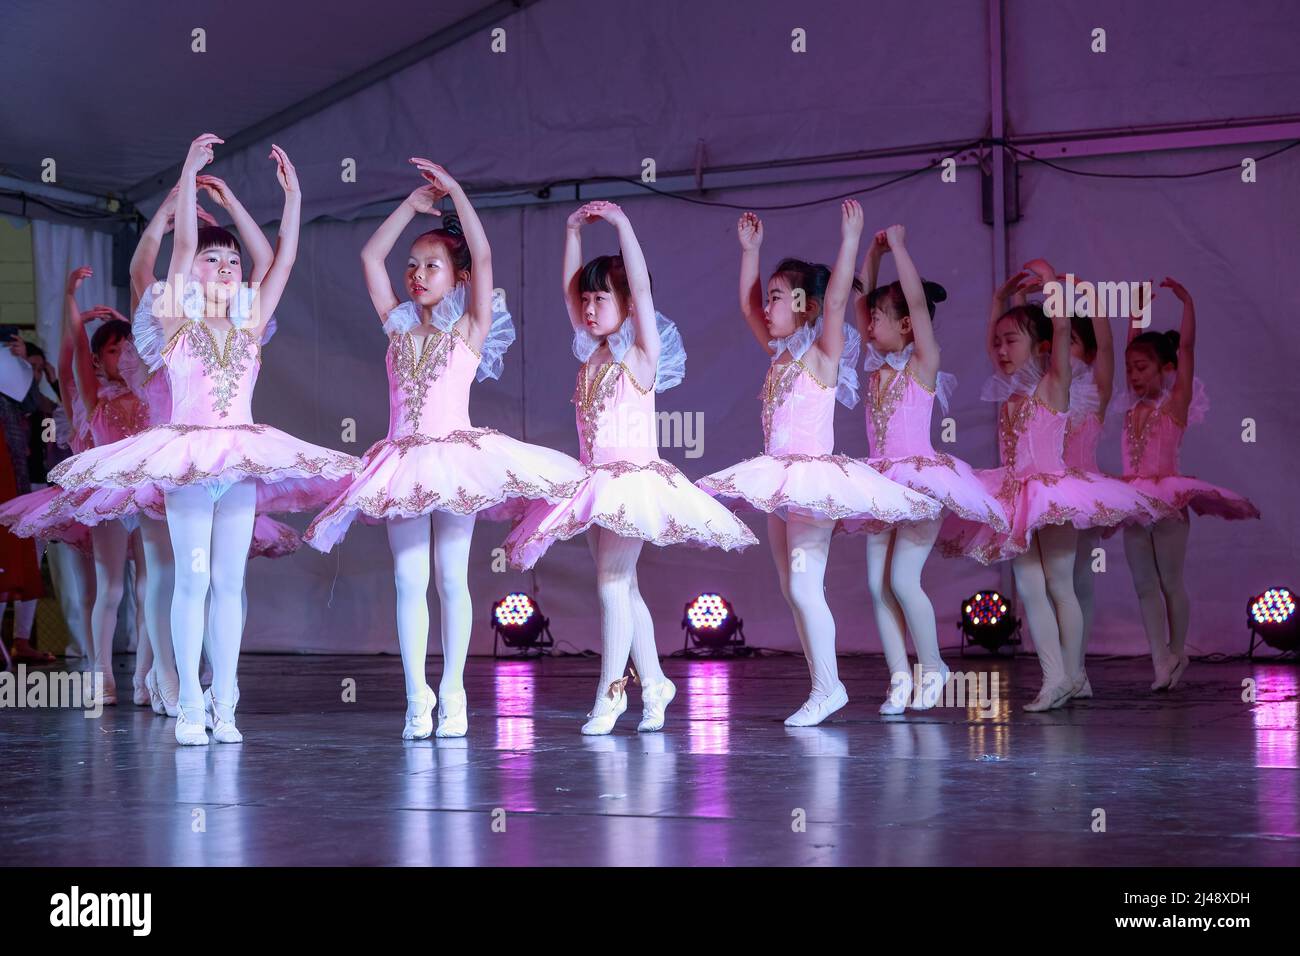 A group of young Asian ballerinas performing on stage in pink tutus Stock Photo